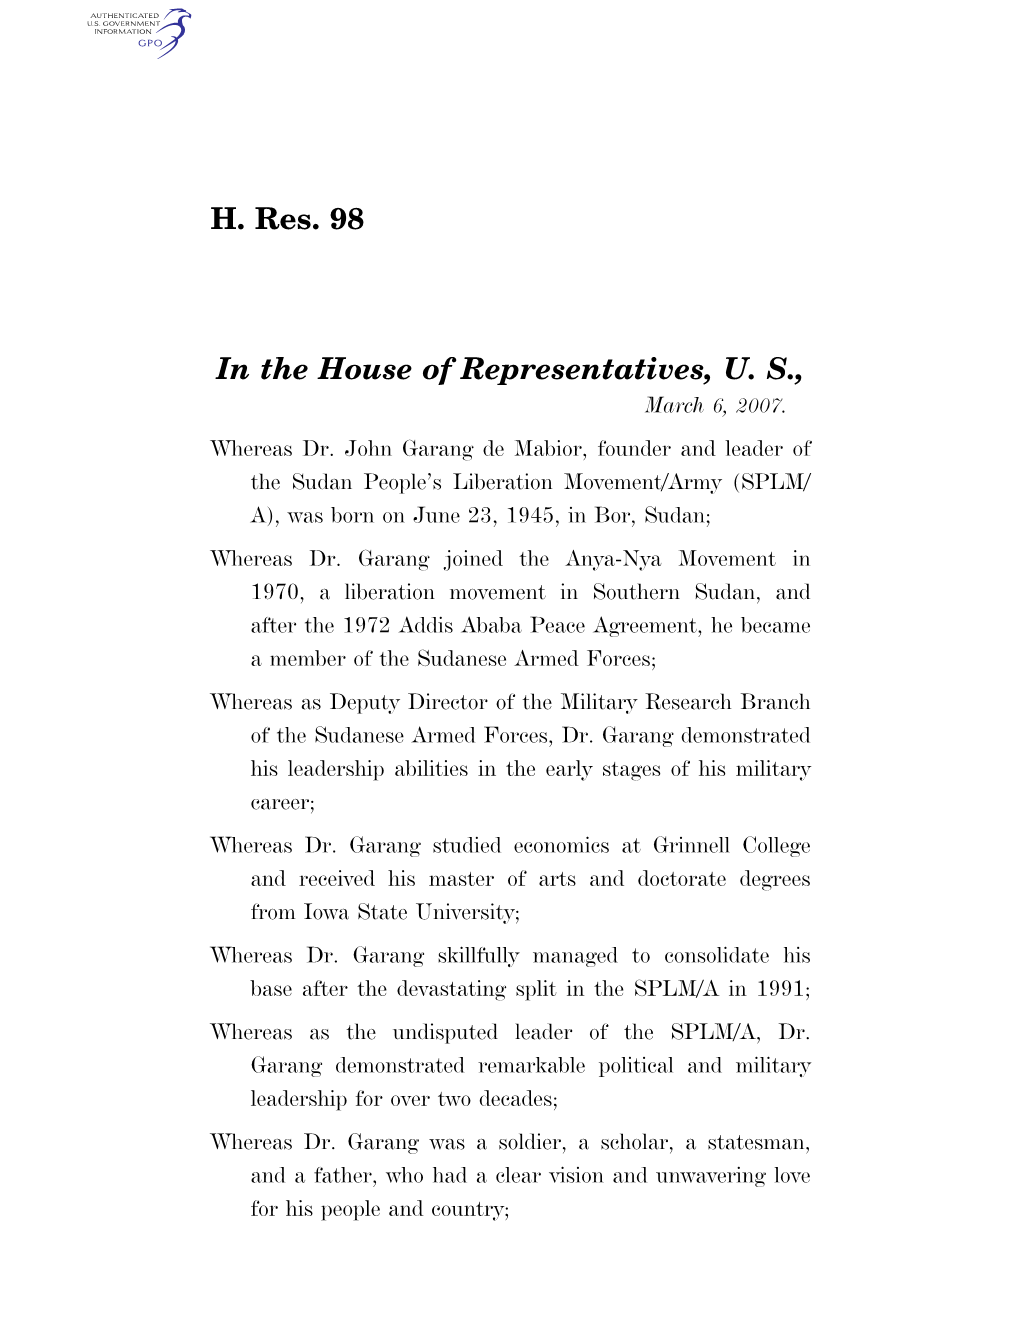 H. Res. 98 in the House of Representatives, U